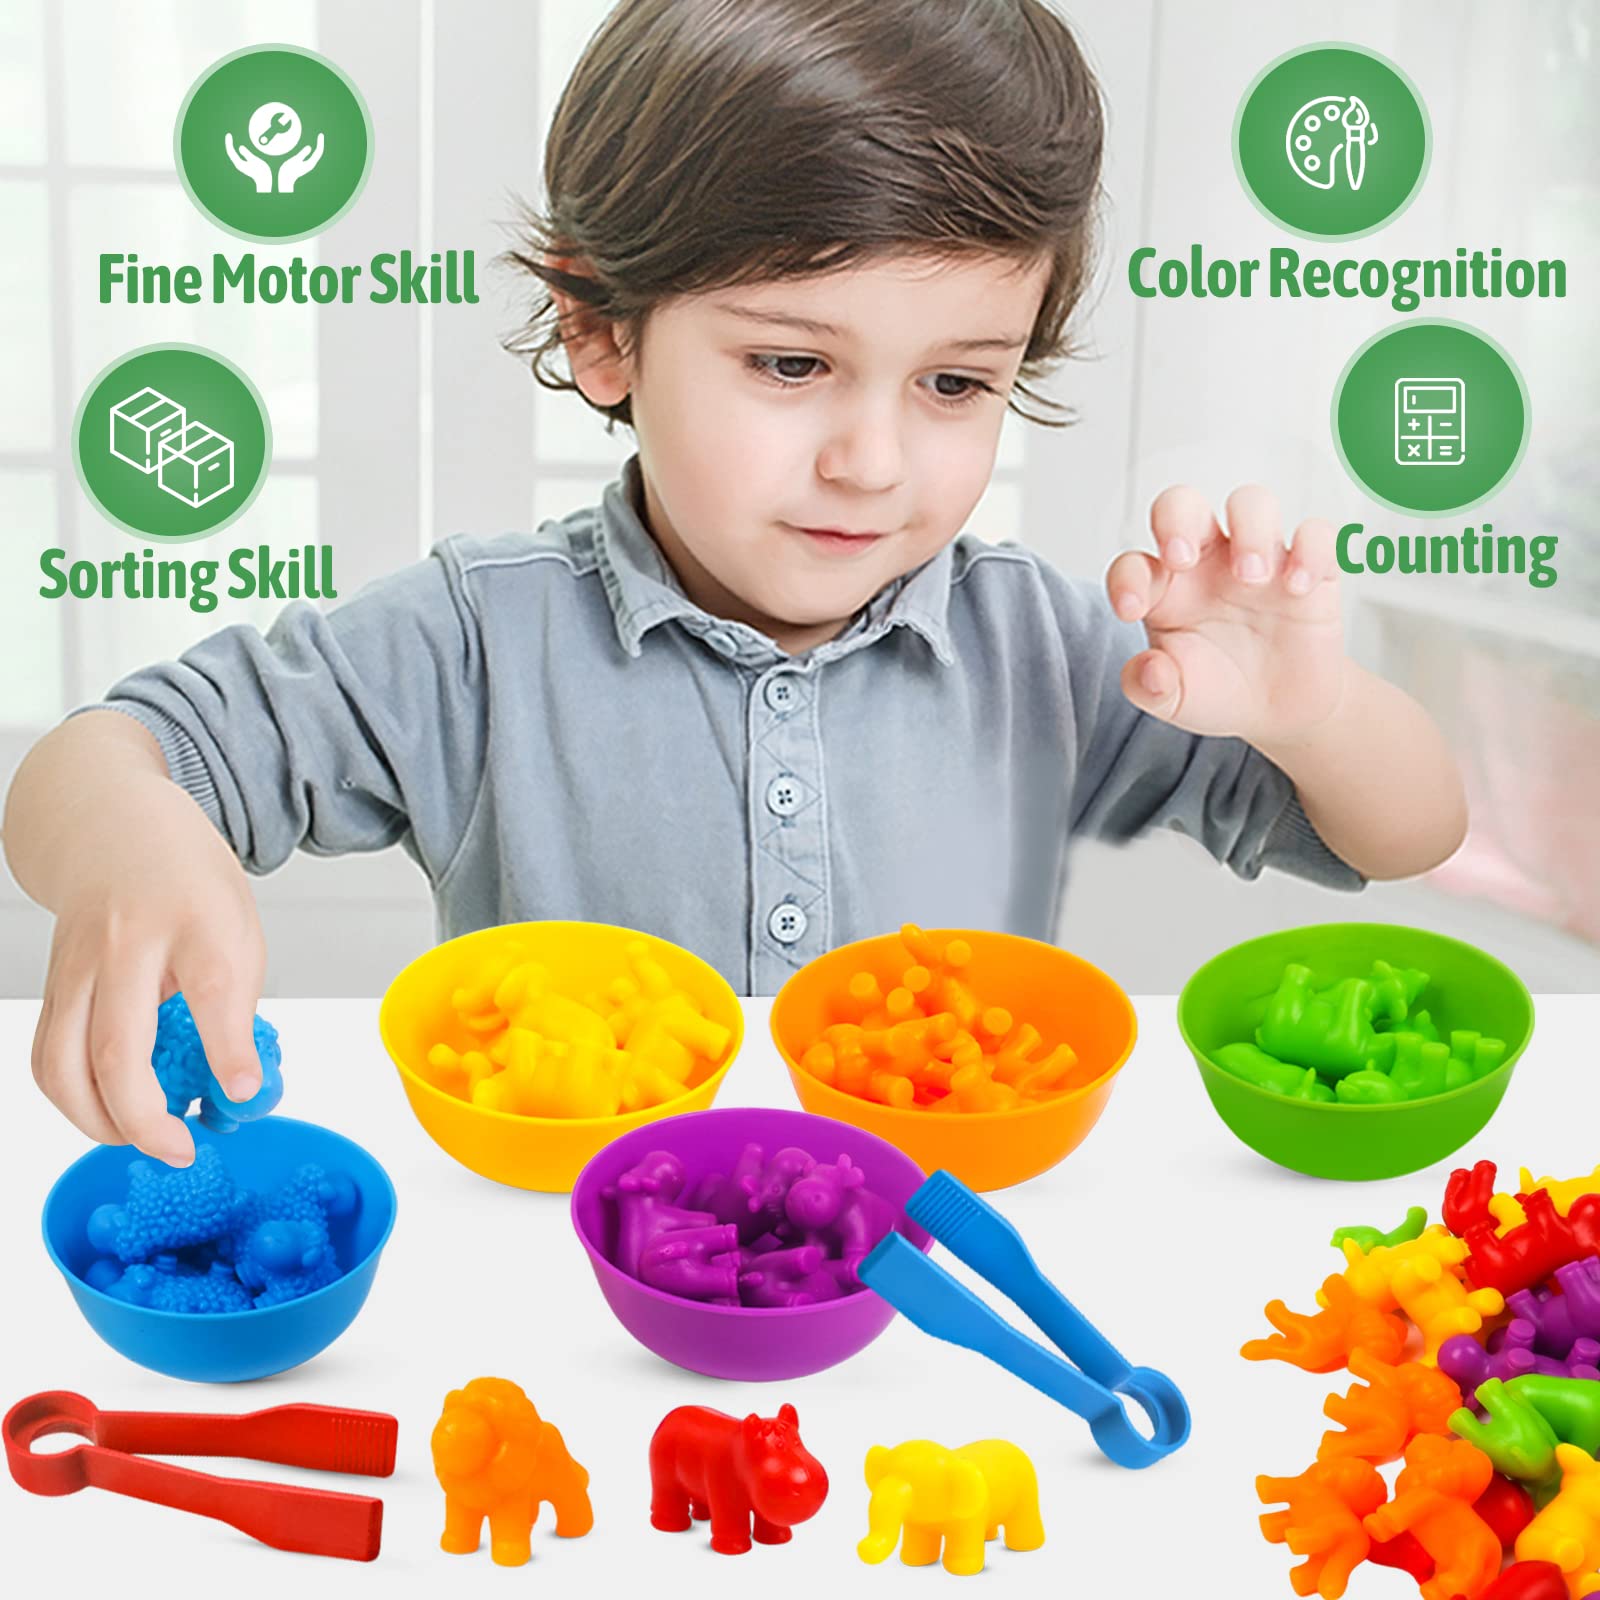 Counting Animals Matching Games Color Sorting Stacking Toys with Bowls Preschool Learning Activities Educational Sensory Montessori STEM Toy Daycare Sets Gift for Toddlers Kids Boys Girls Aged 3+ Year